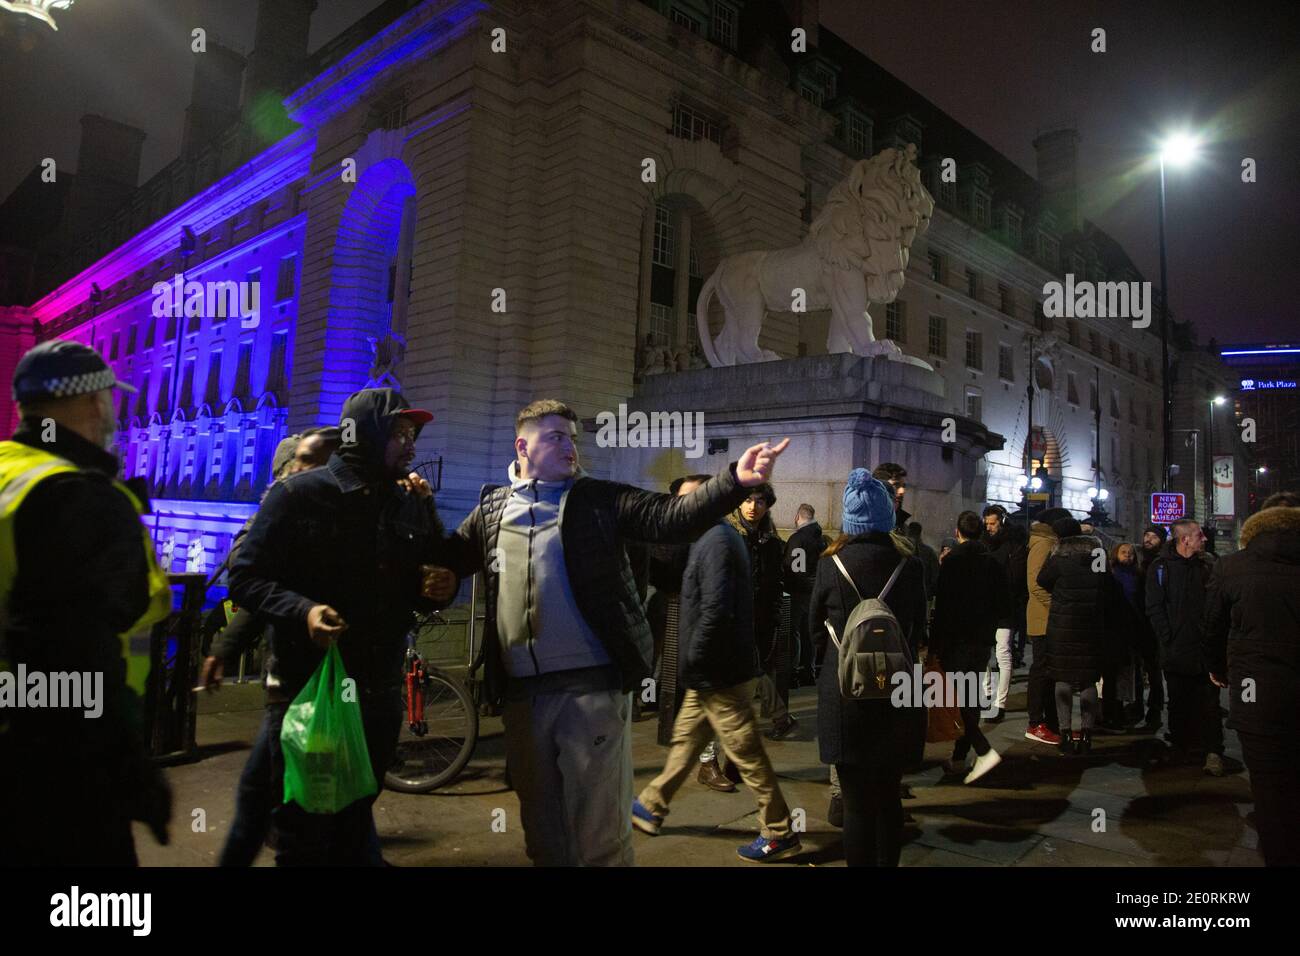 An anti lockdown protest takes place on New Year's Eve on London's South Bank. — 31. December 2020, England, London, UK Stock Photo